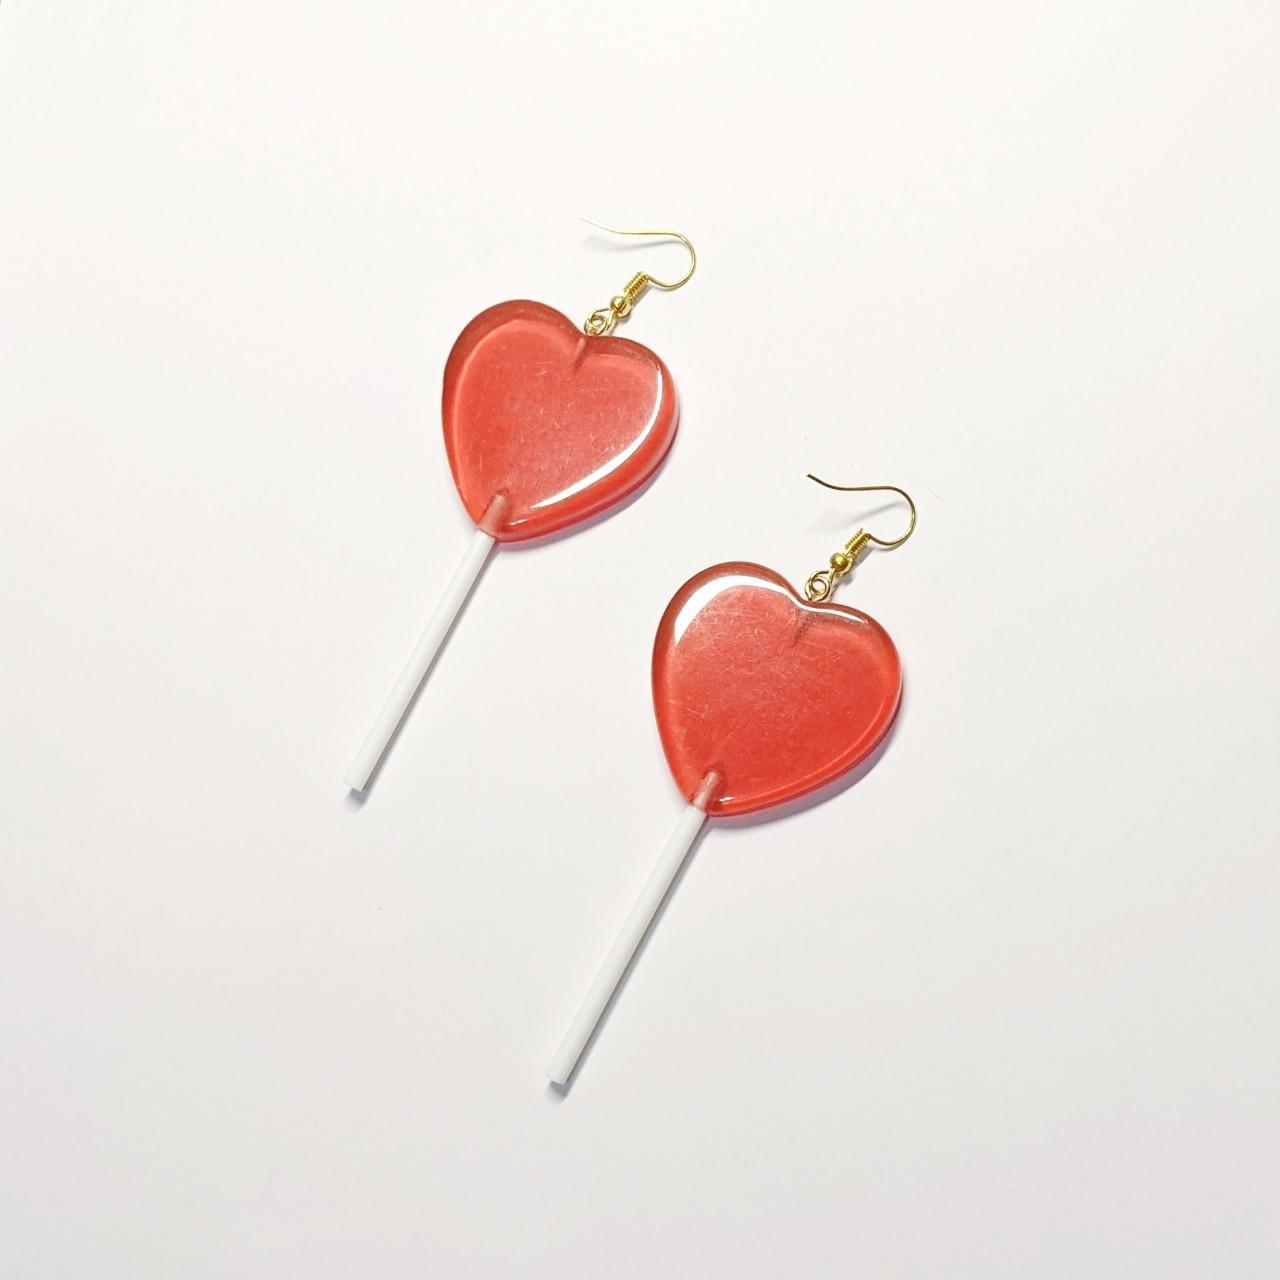 Product Image 1 - (On hold)

❤️ Red heart lollipop